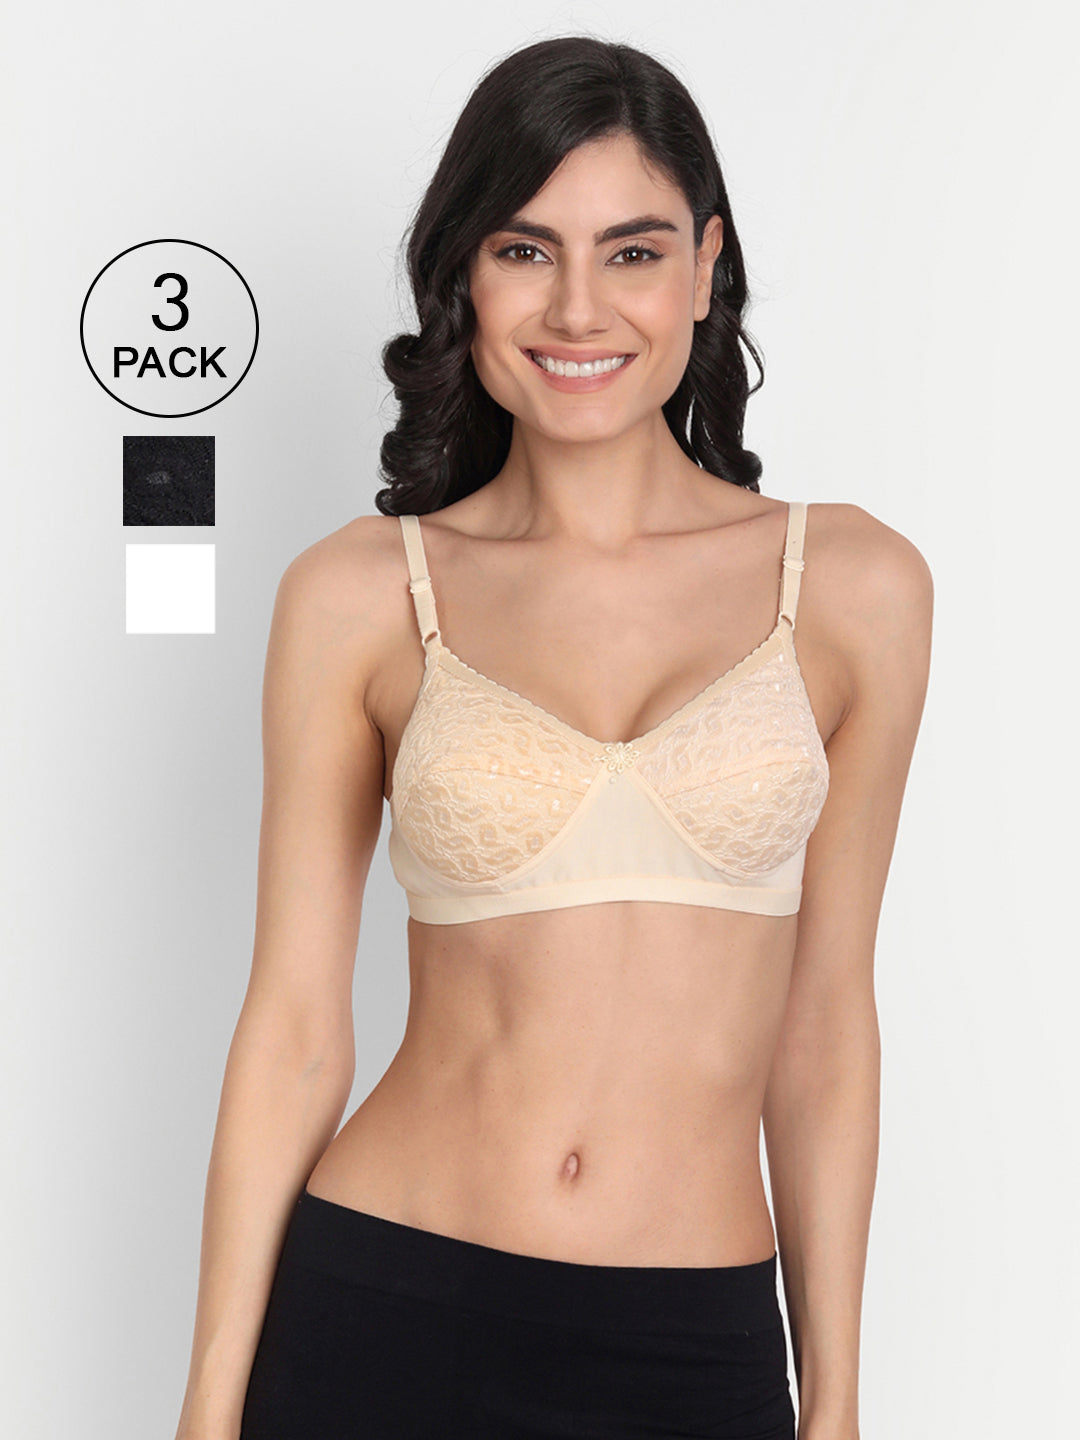 30 Size Bras: Buy 30 Size Bras for Women Online at Low Prices - Snapdeal  India